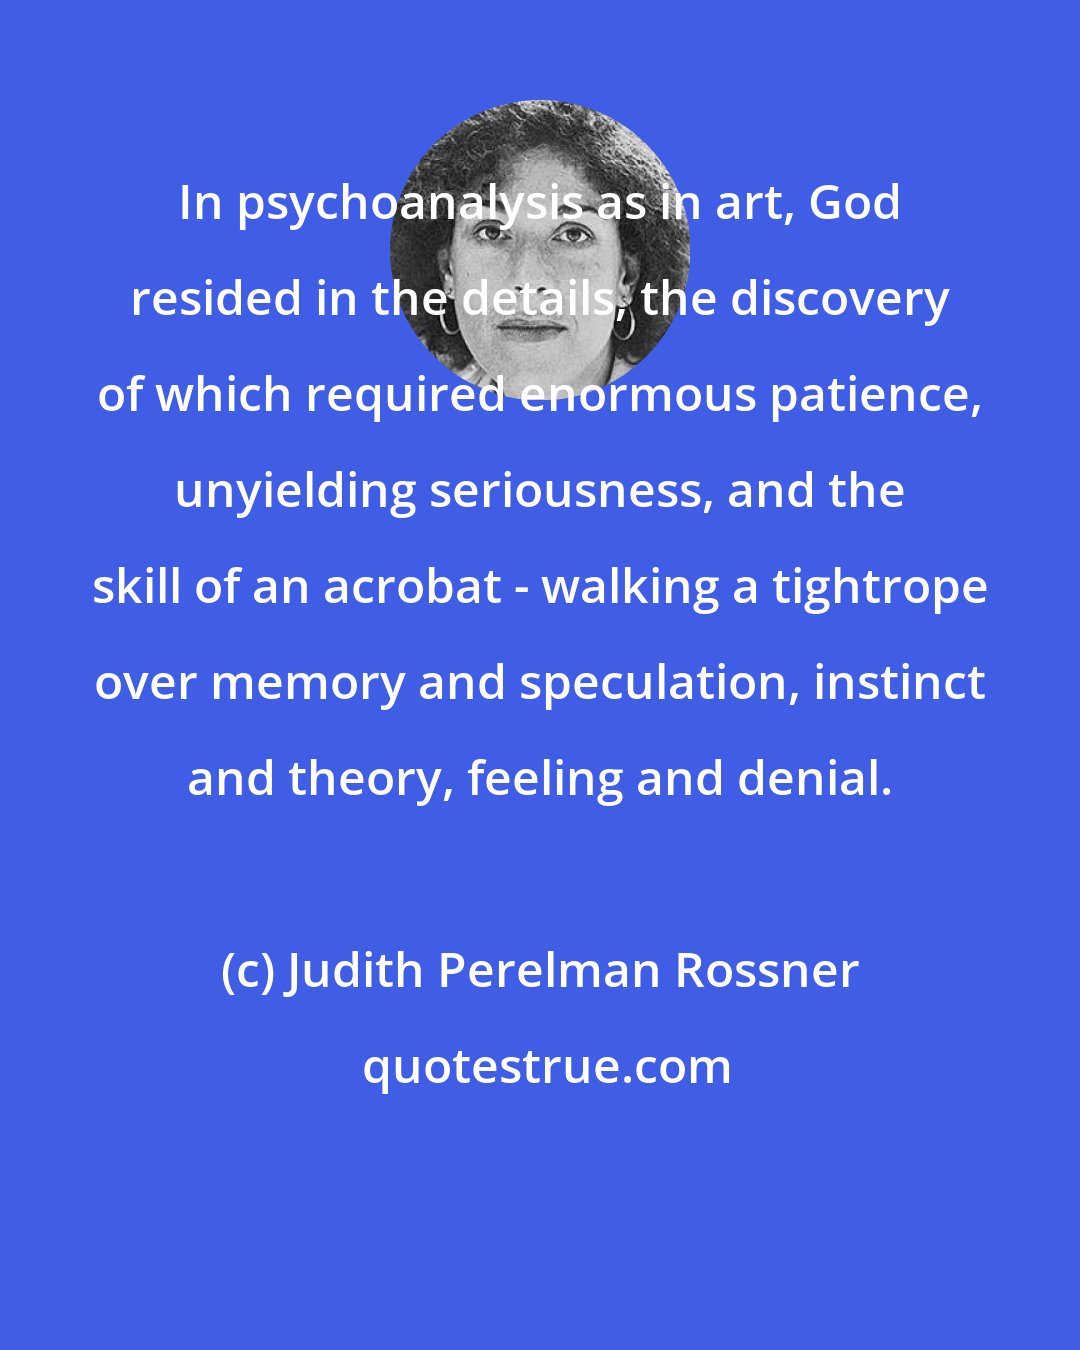 Judith Perelman Rossner: In psychoanalysis as in art, God resided in the details, the discovery of which required enormous patience, unyielding seriousness, and the skill of an acrobat - walking a tightrope over memory and speculation, instinct and theory, feeling and denial.